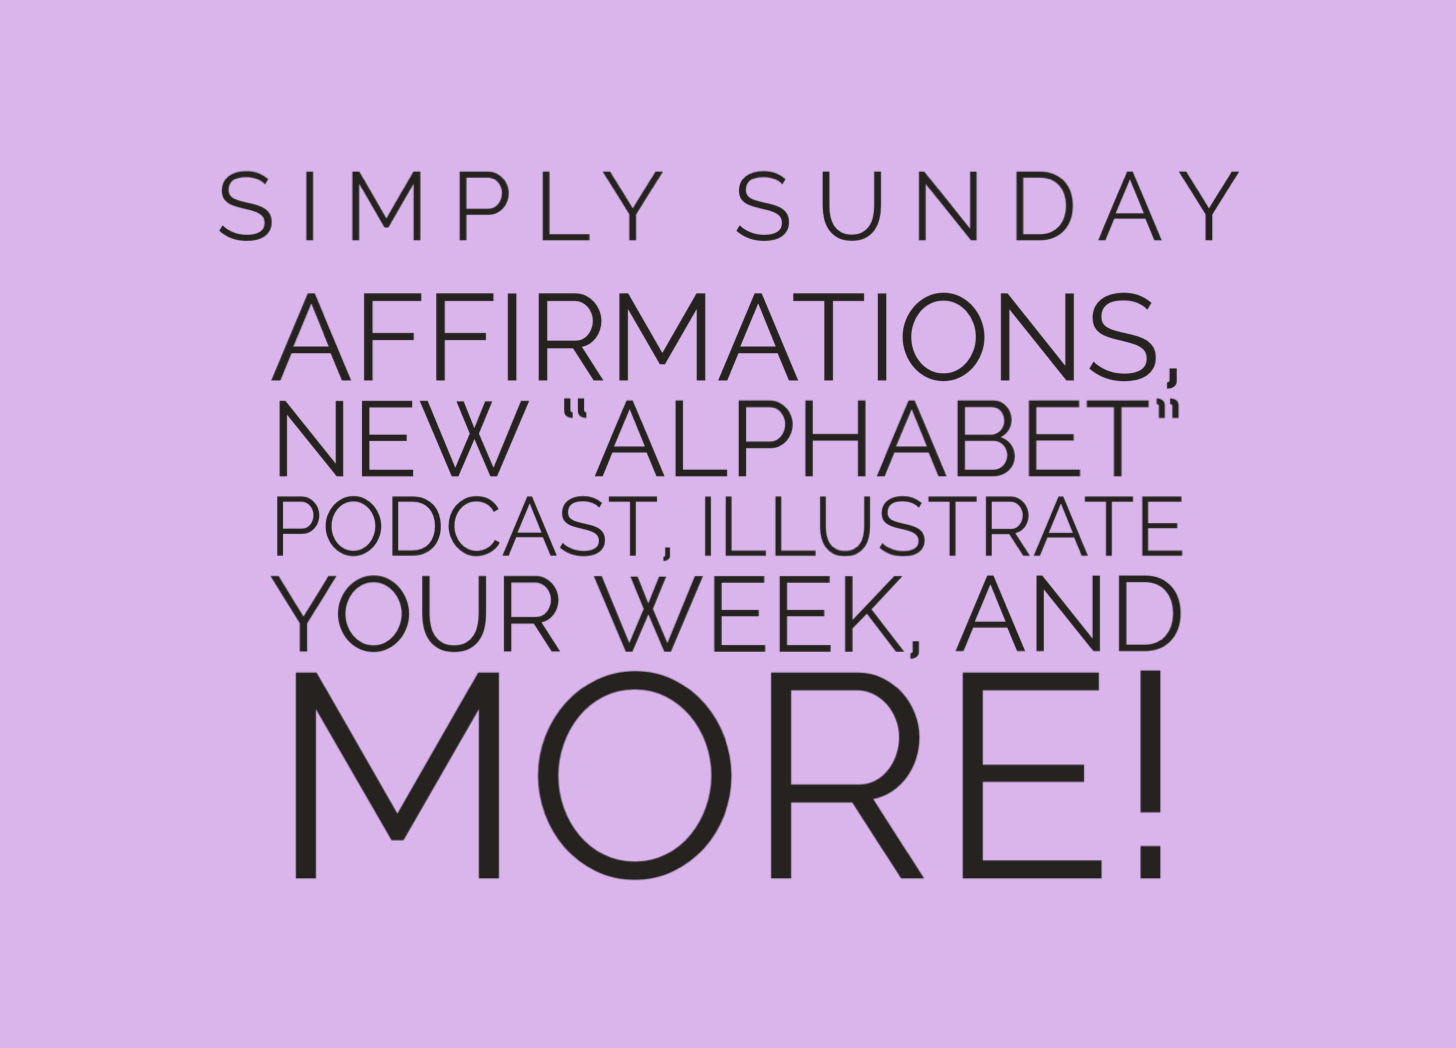 Affirmations, a new episode, Illustrate Your Week prompts, and more